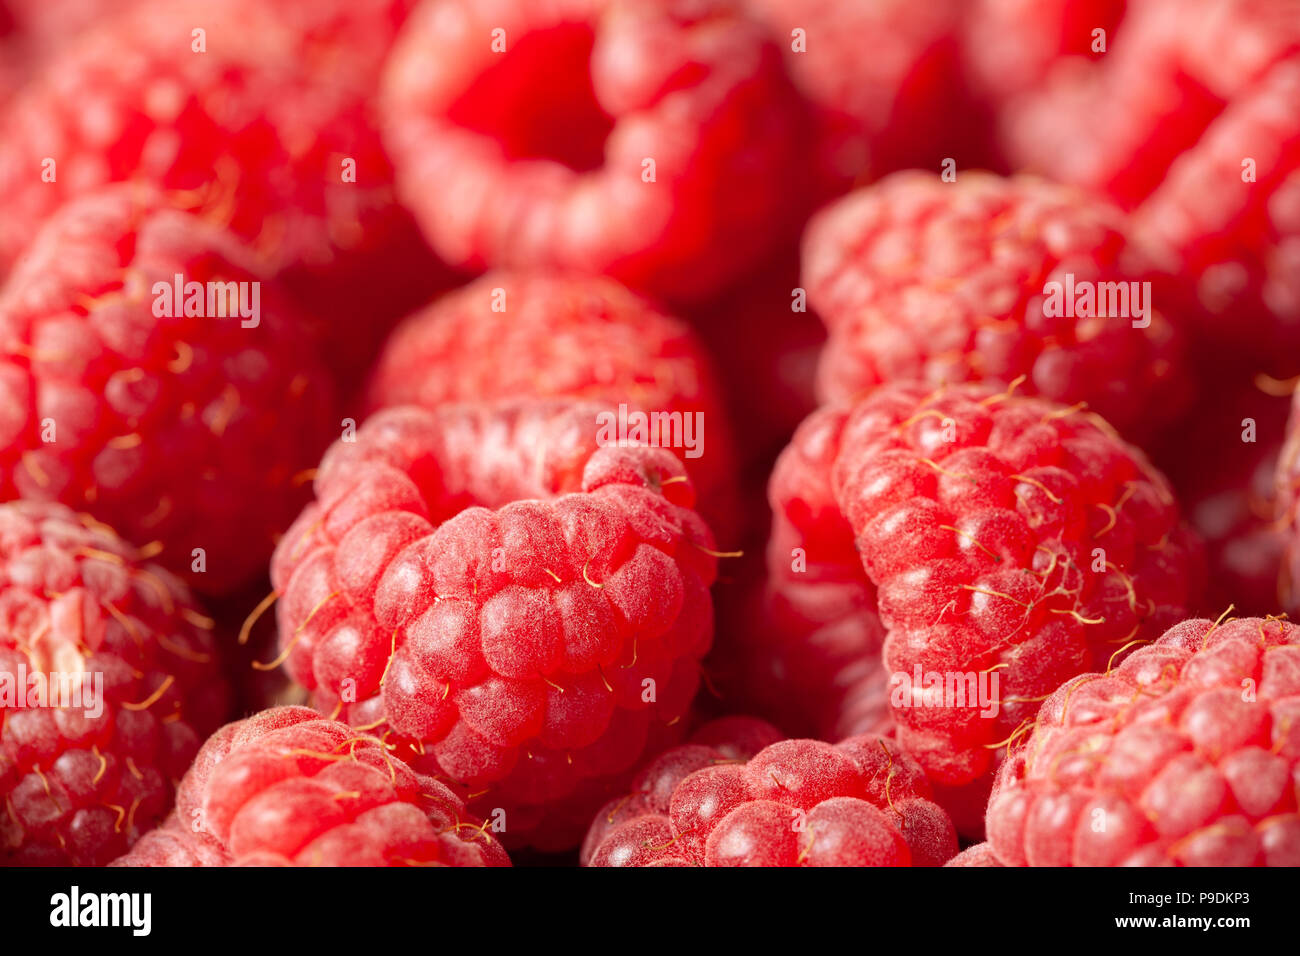 Red and ripe fresh raspberries close view as a background. Full frame image. Stock Photo